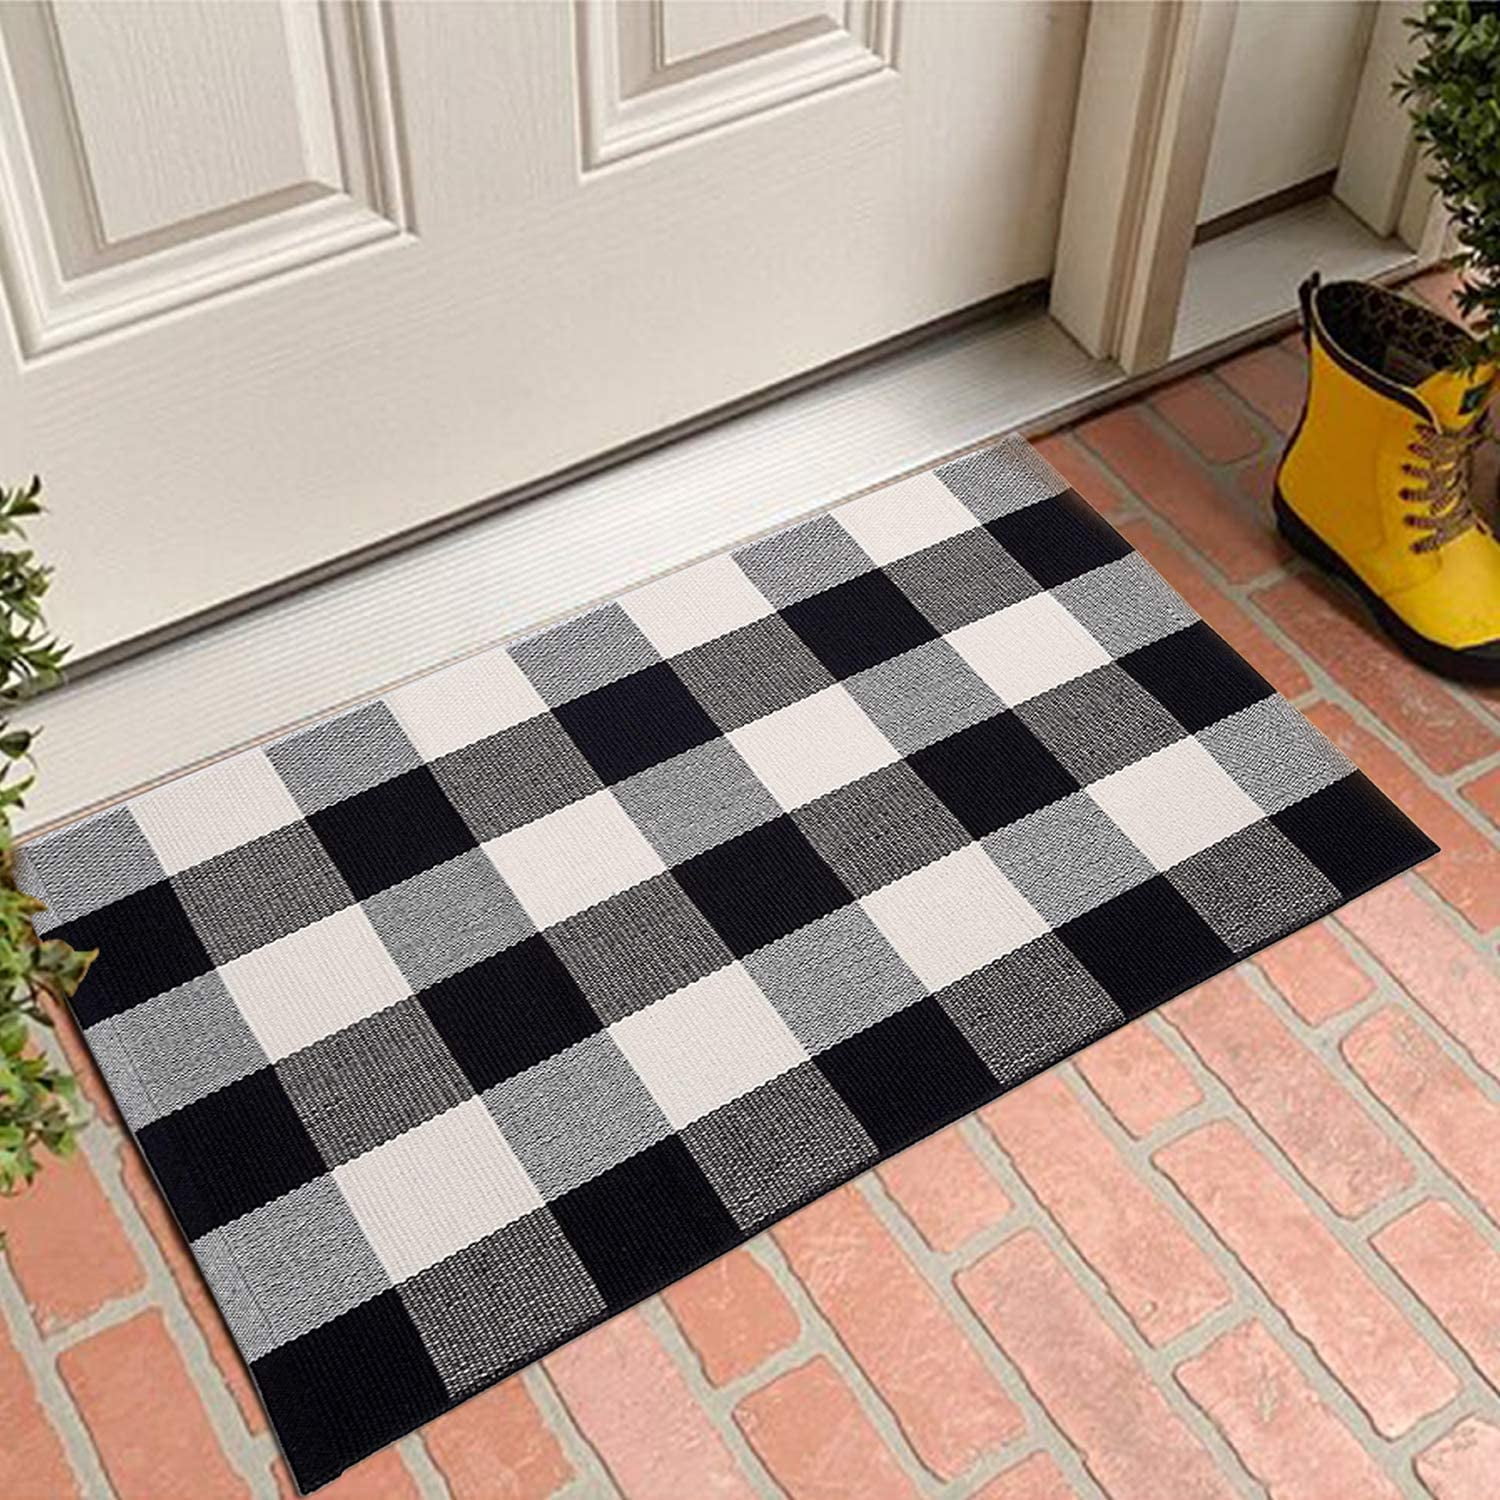 White Checd Rug Welcome Door Mat, Red And Black Buffalo Plaid Kitchen Rugs